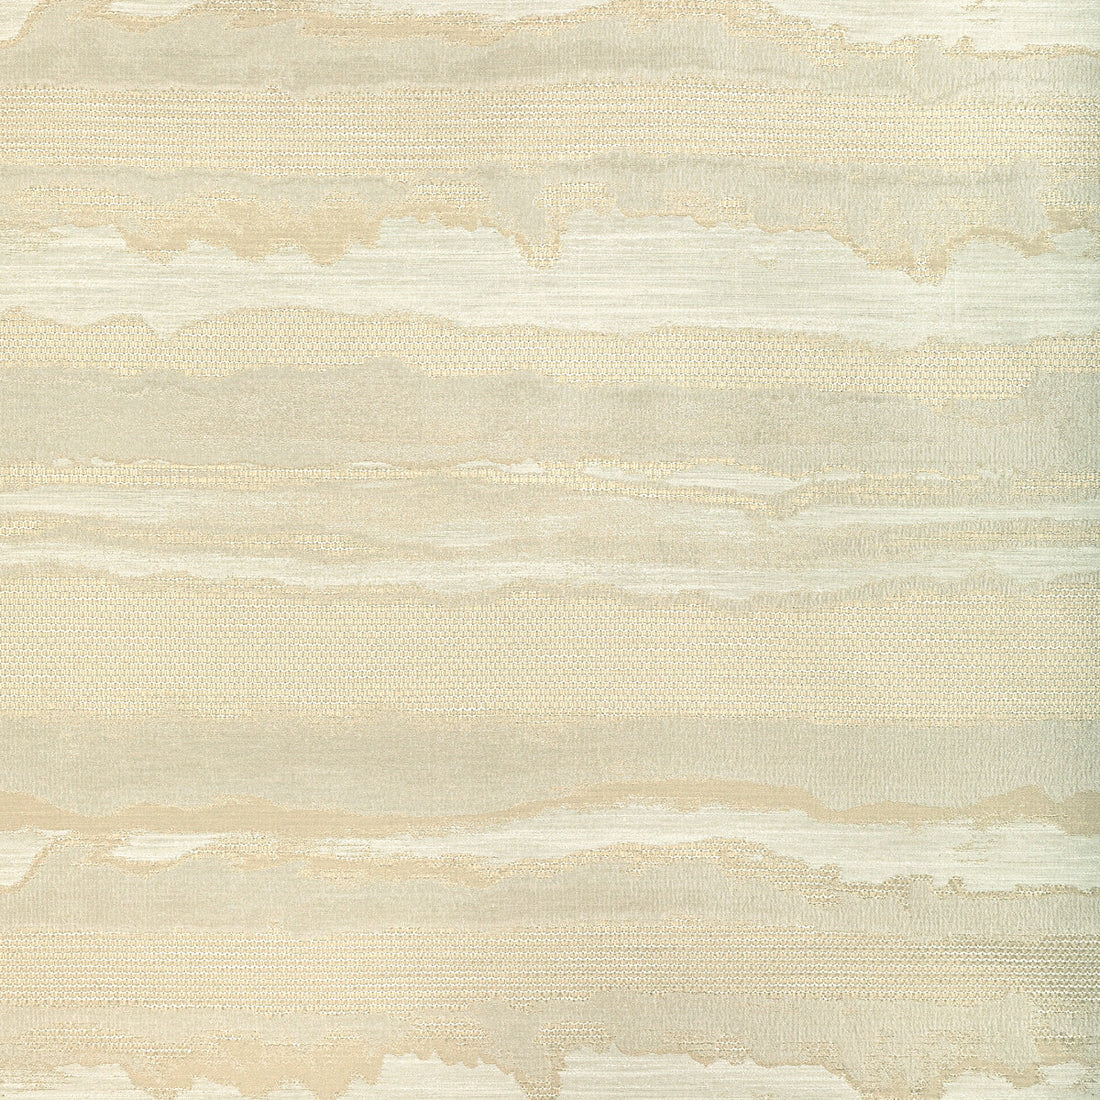 Silken Dreams fabric in gold color - pattern 4952.416.0 - by Kravet Couture in the Modern Luxe Silk Luster collection